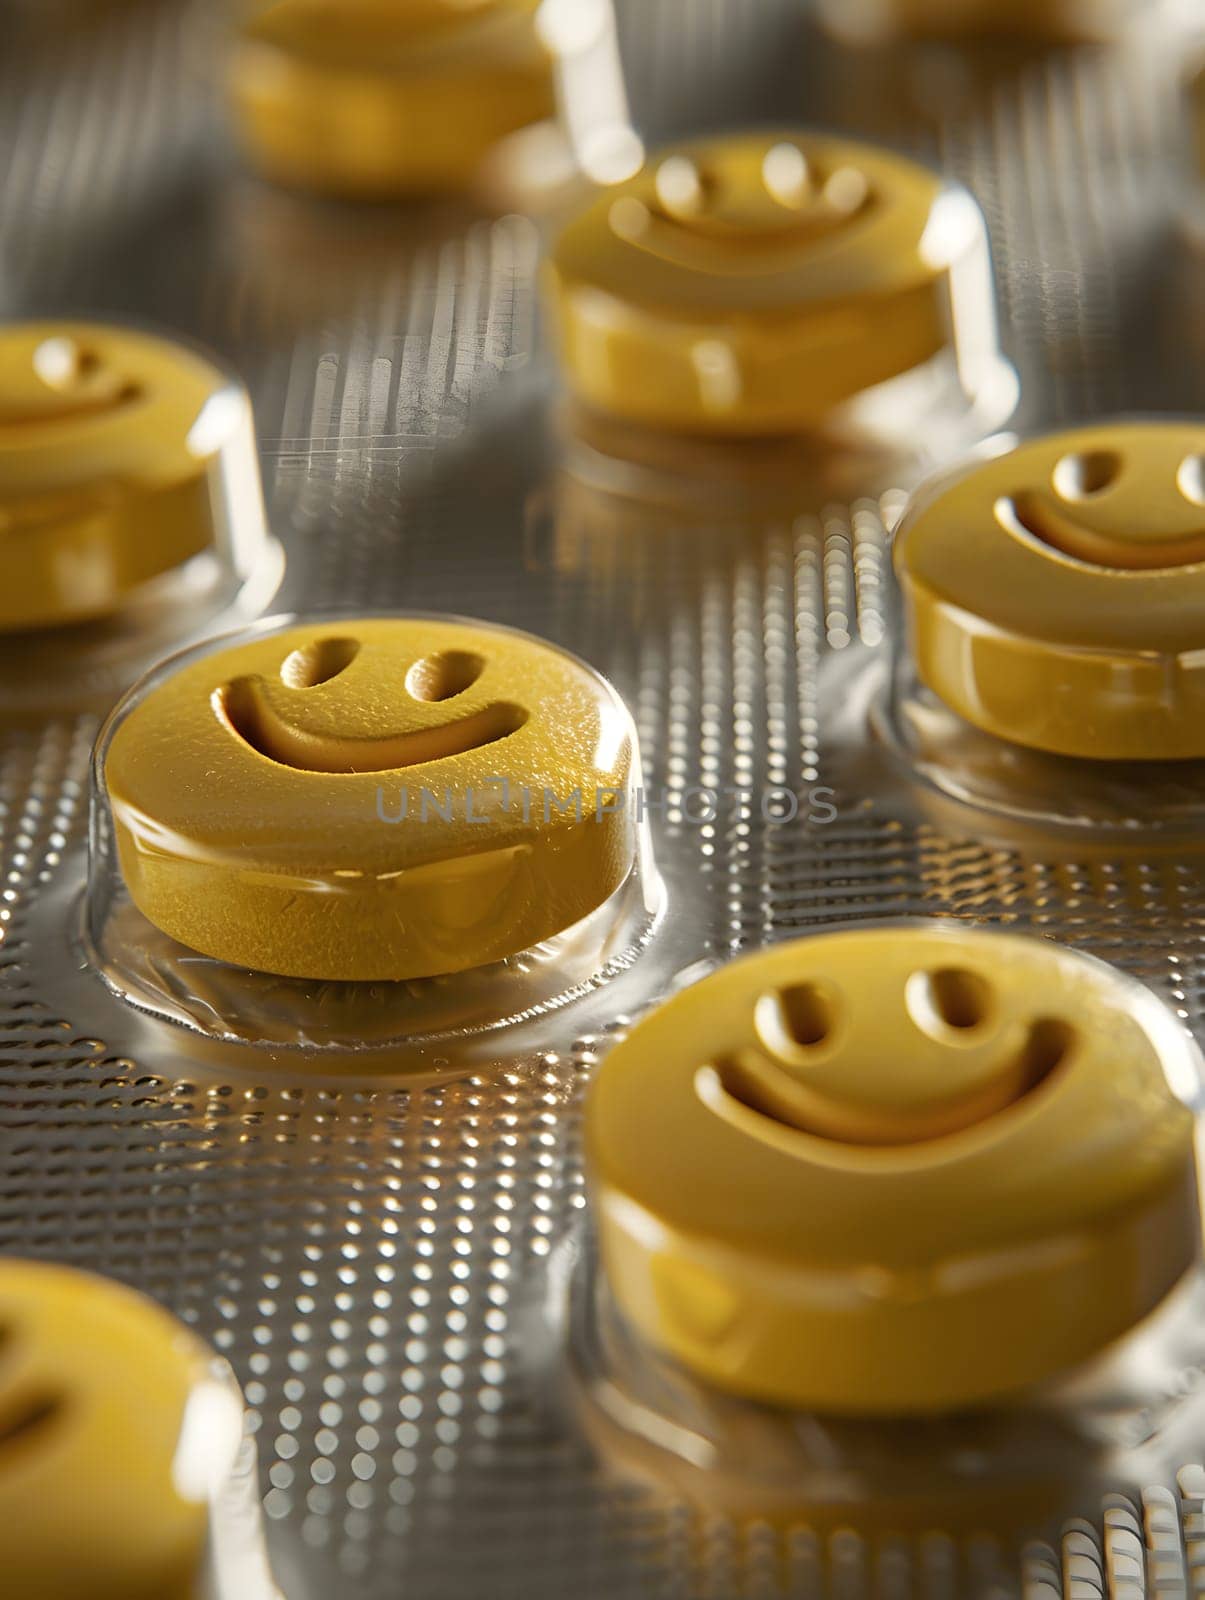 A batch of sunny yellow pills with cheerful smiley faces, reminiscent of finger foods or baked goods. Each one brimming with sweetness and sure to lift your spirits